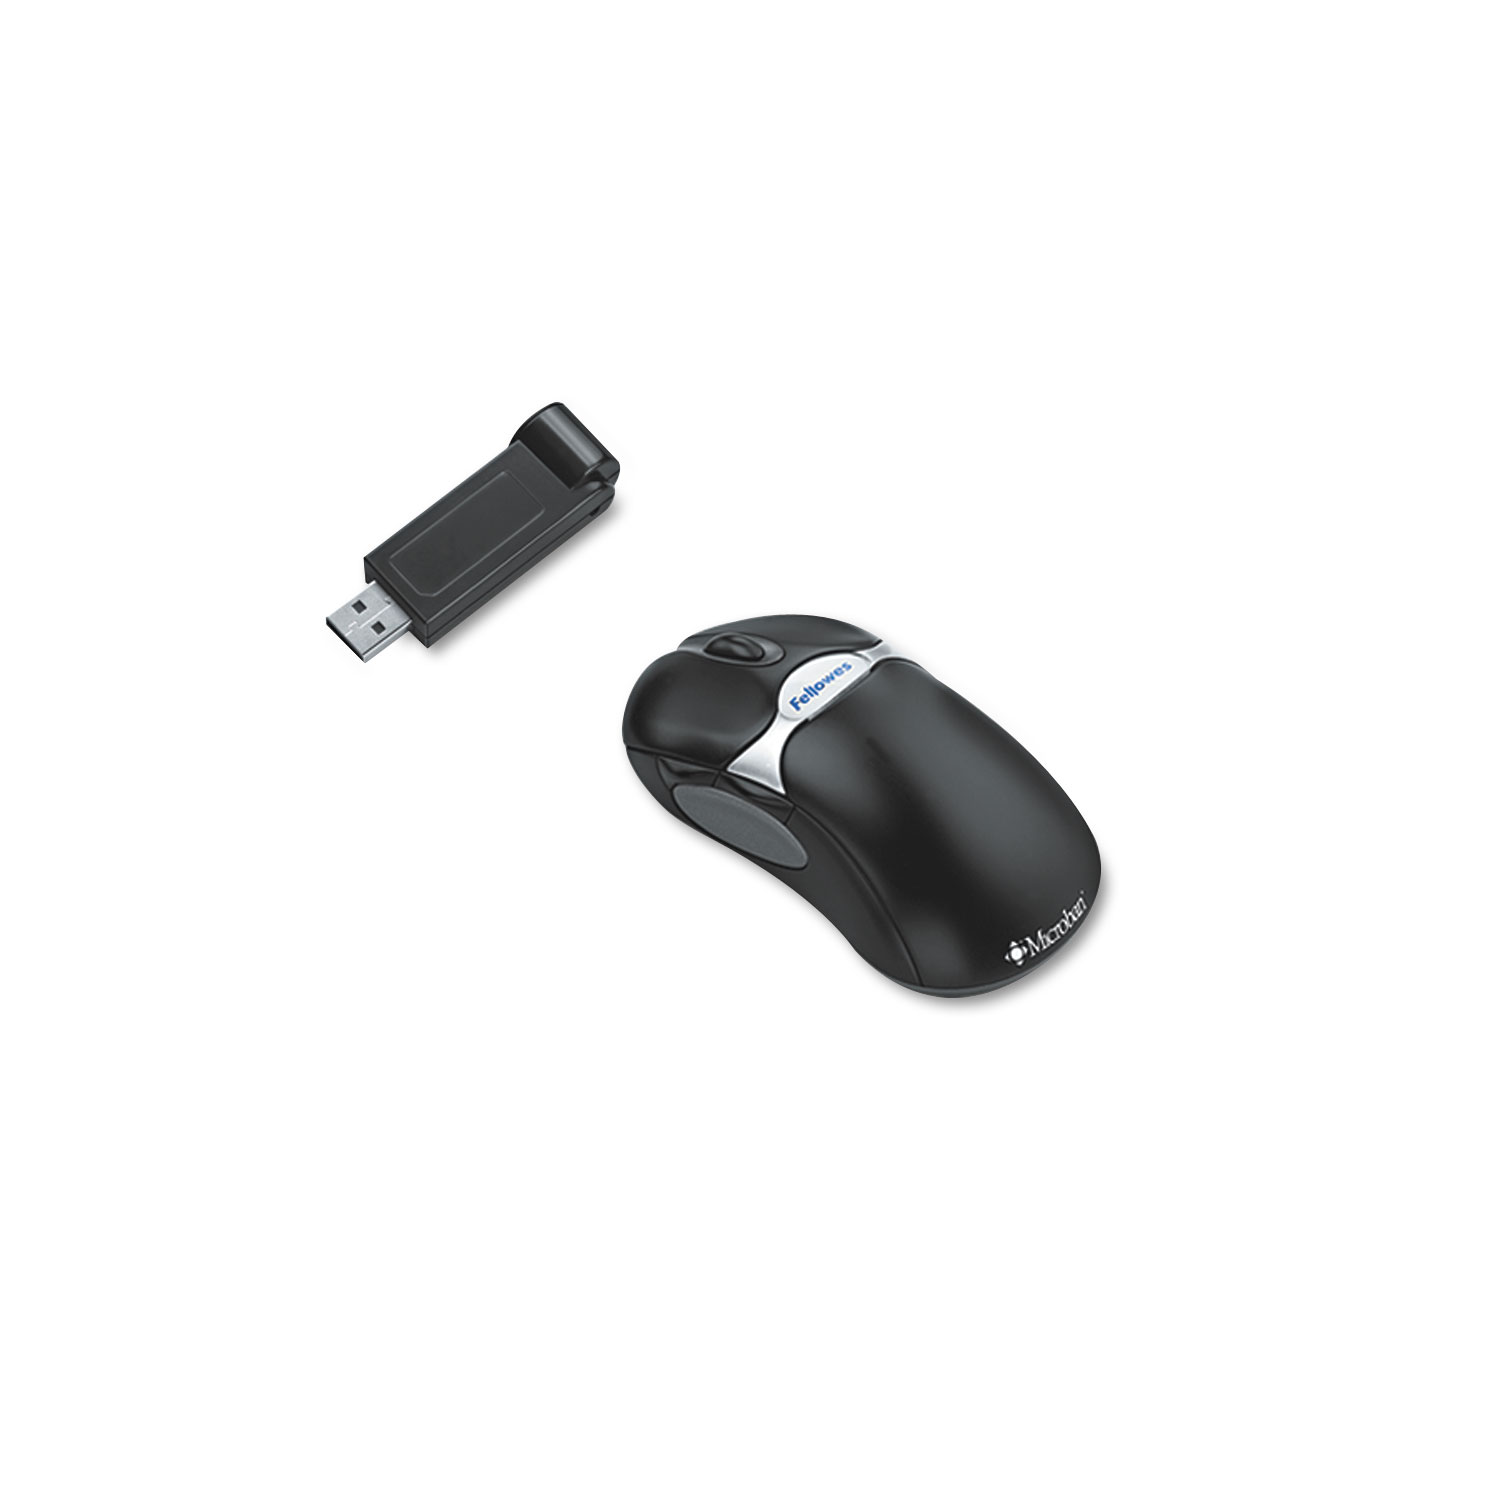 Optical Cordless Mouse, Antimicrobial, Five-Button/Scroll, Black/Silver